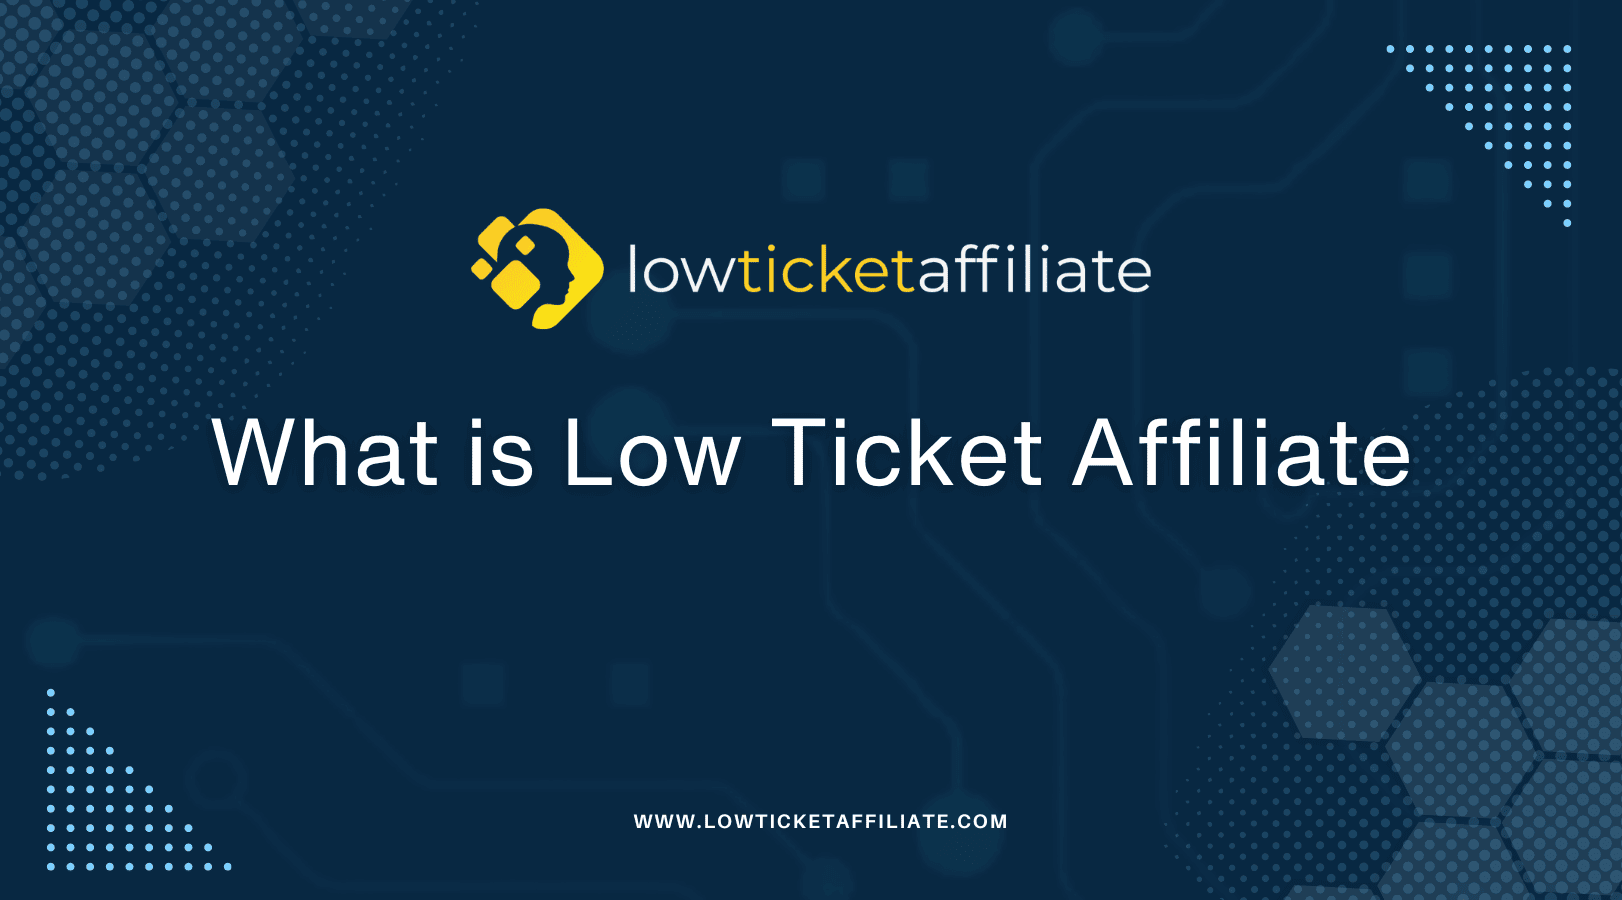 What is Low Ticket Affiliate